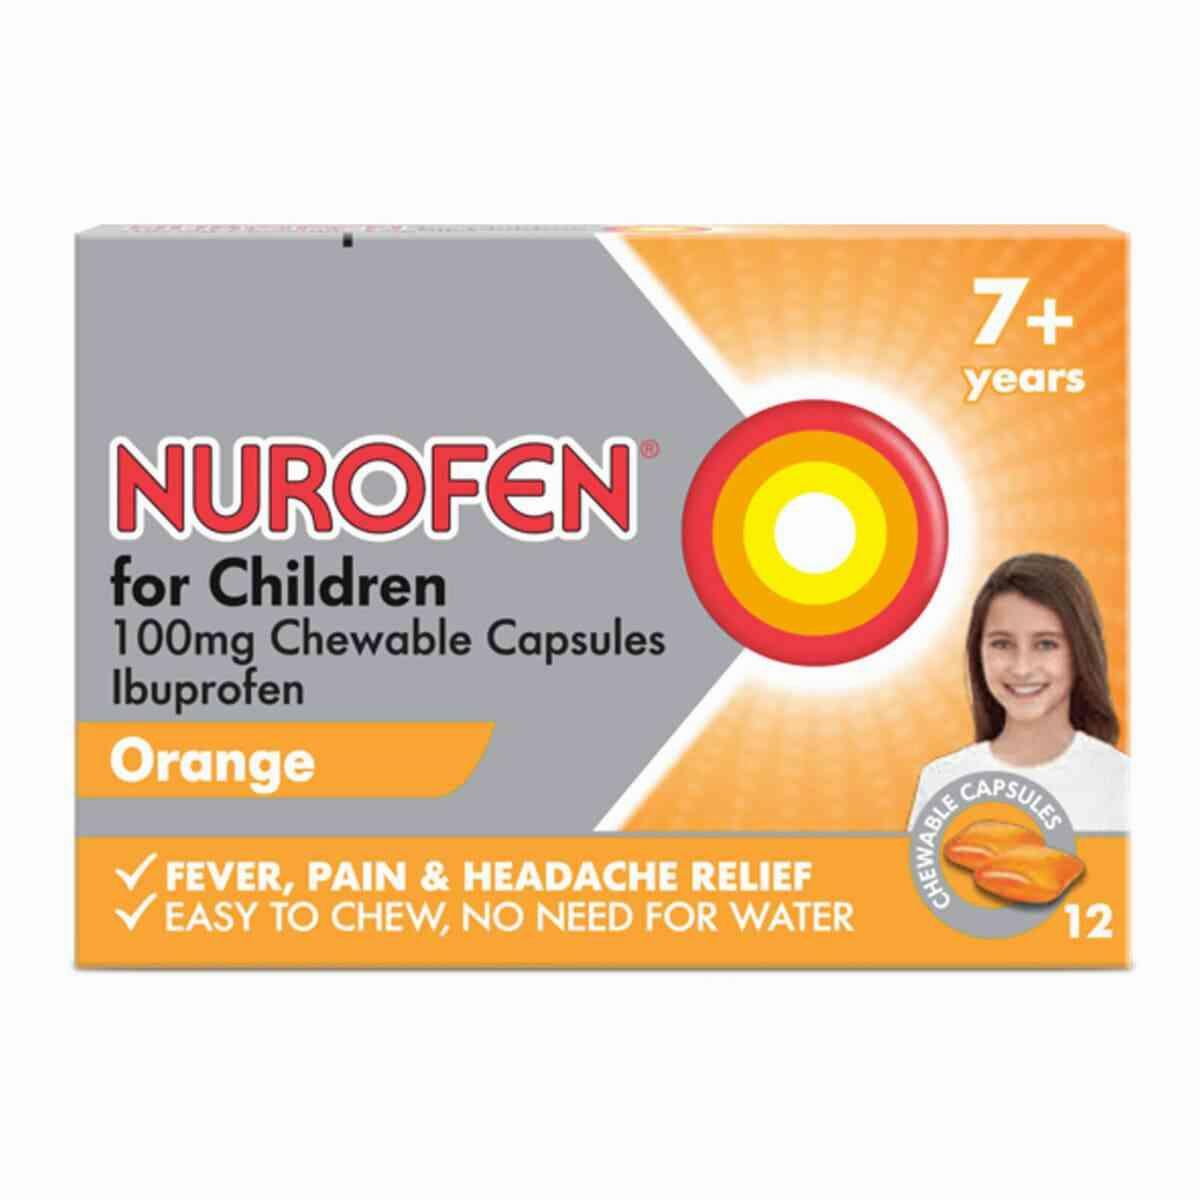 Practical Tips for Nurofen Users Concerned About Drowsiness